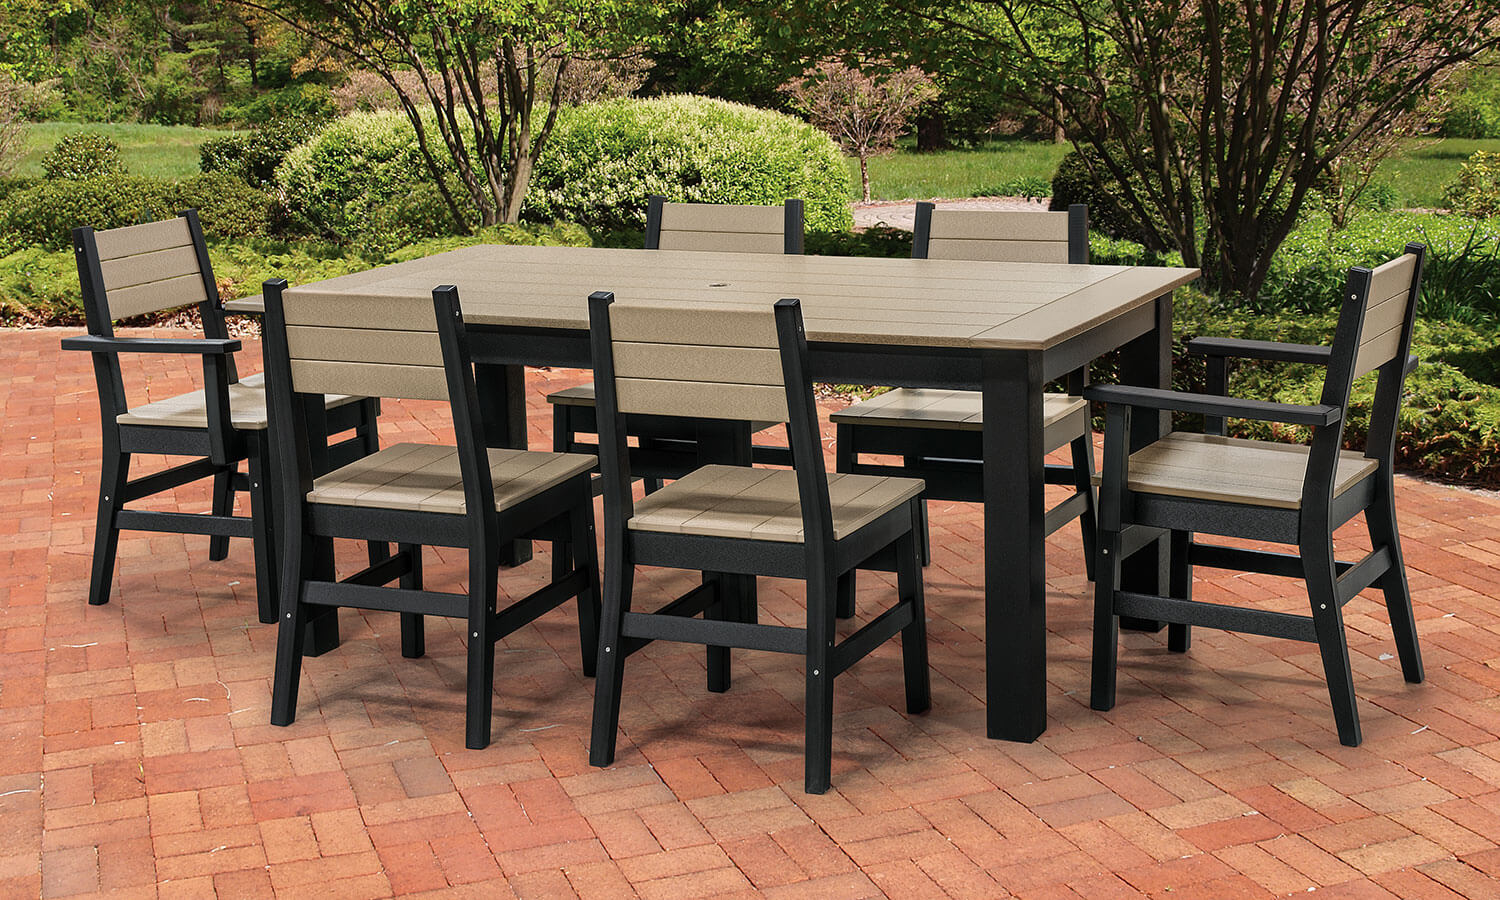 EC Woods Acadia Dining Height Outdoor Poly Furniture Set Shown in Weathered Wood and Black